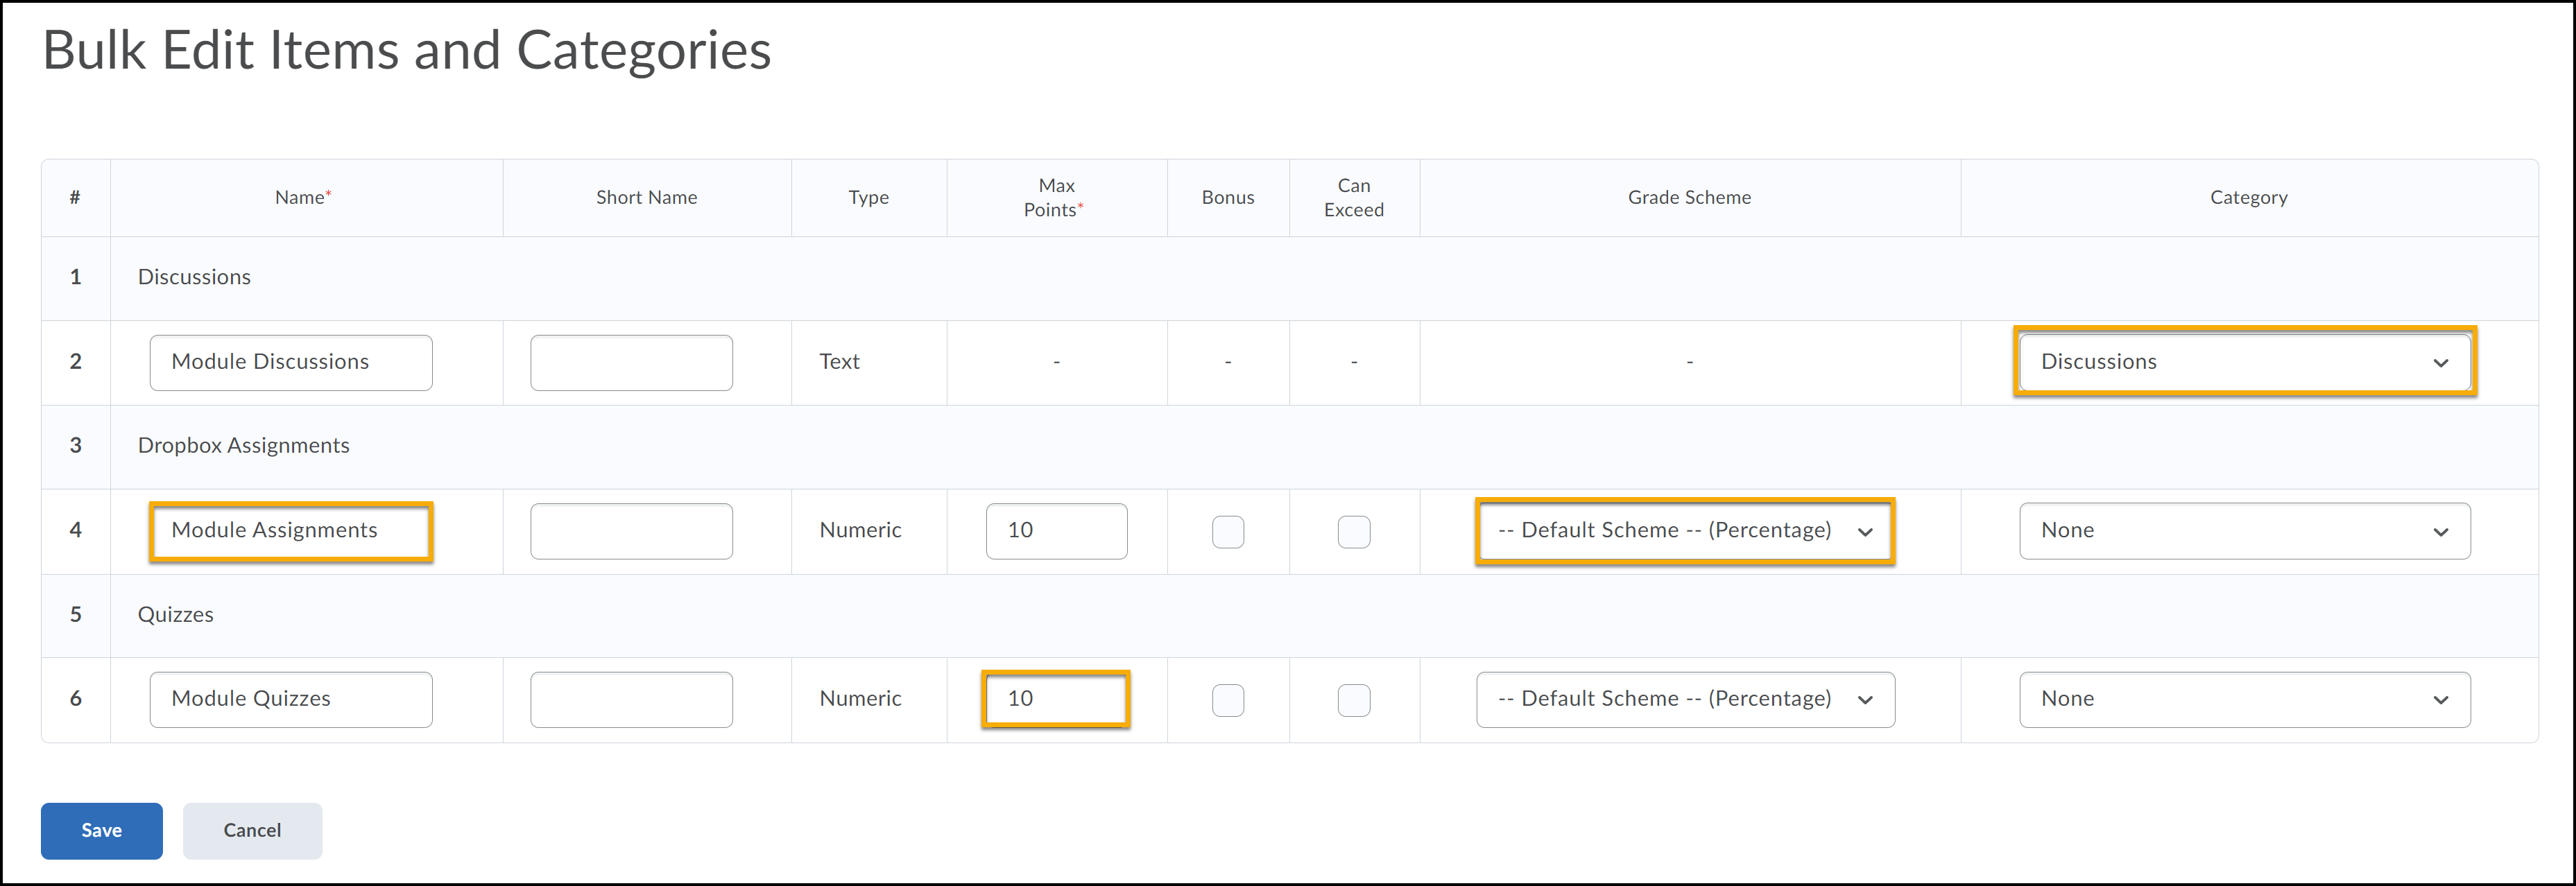 Editable fields highlighted, including categories, grade scheme, points and title.